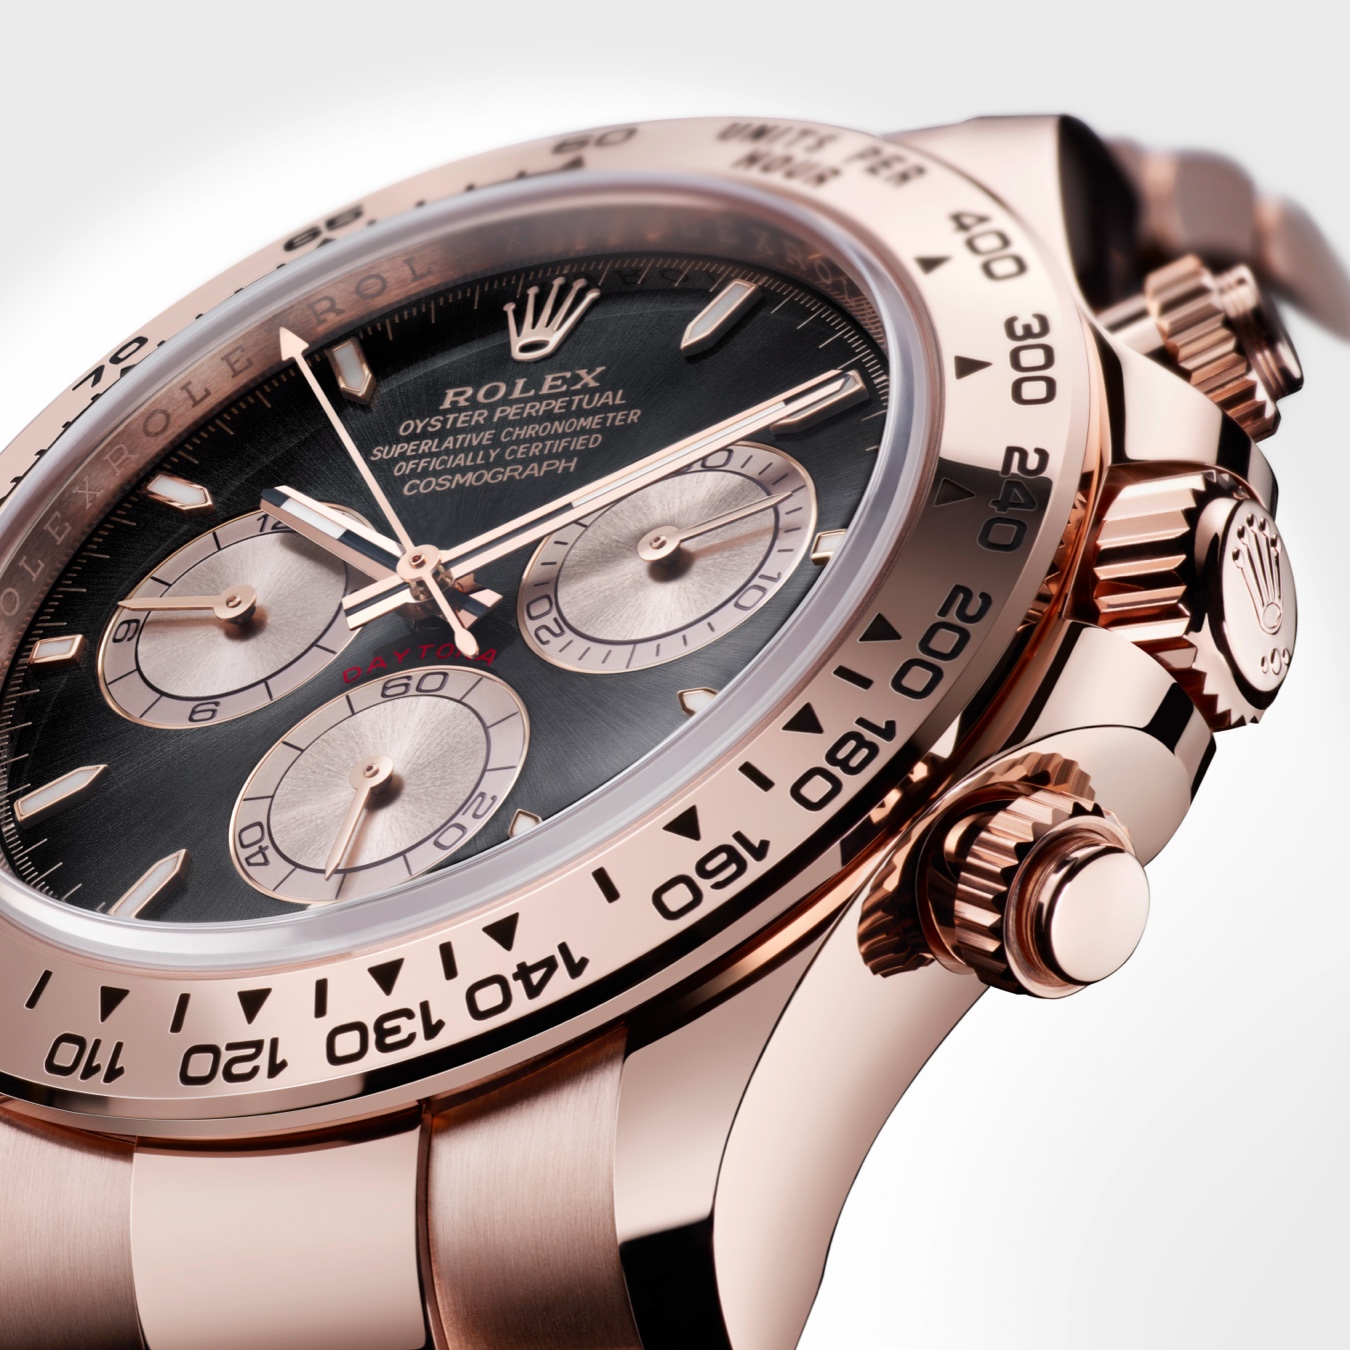 Rolex rose gold Oyster Perpetual Daytona Cosmograph dial close up